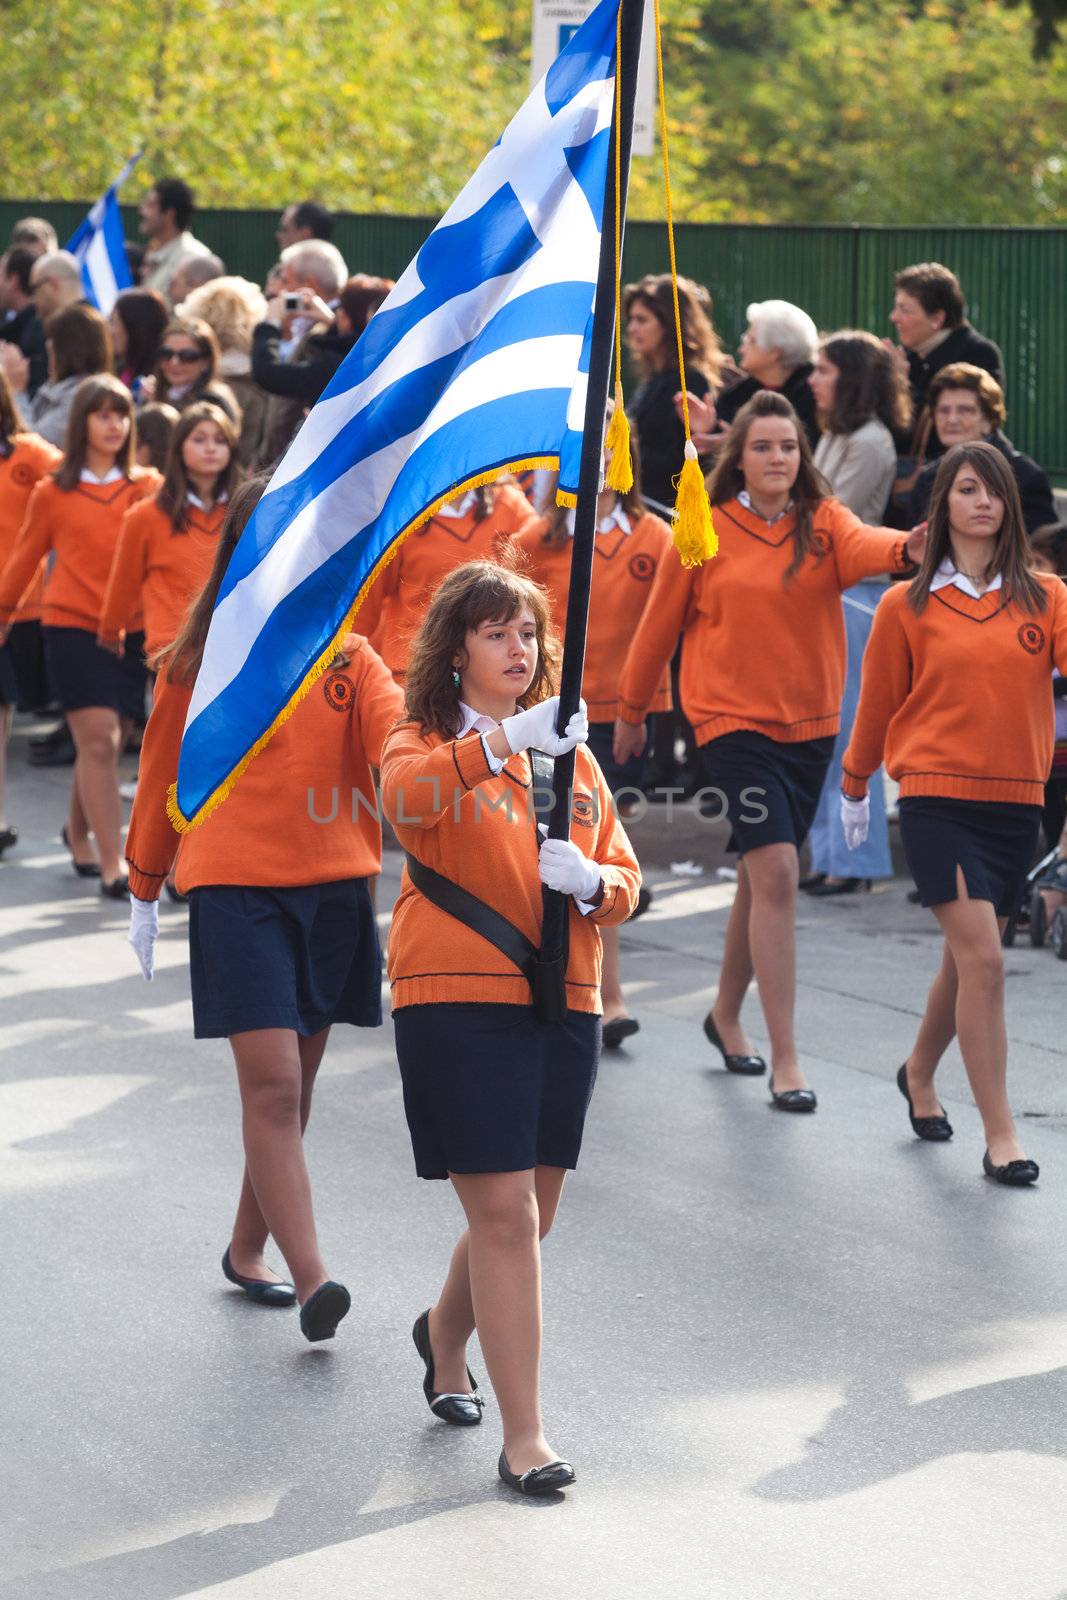 Parade to celebrate the anniversary of 1940 by Portokalis